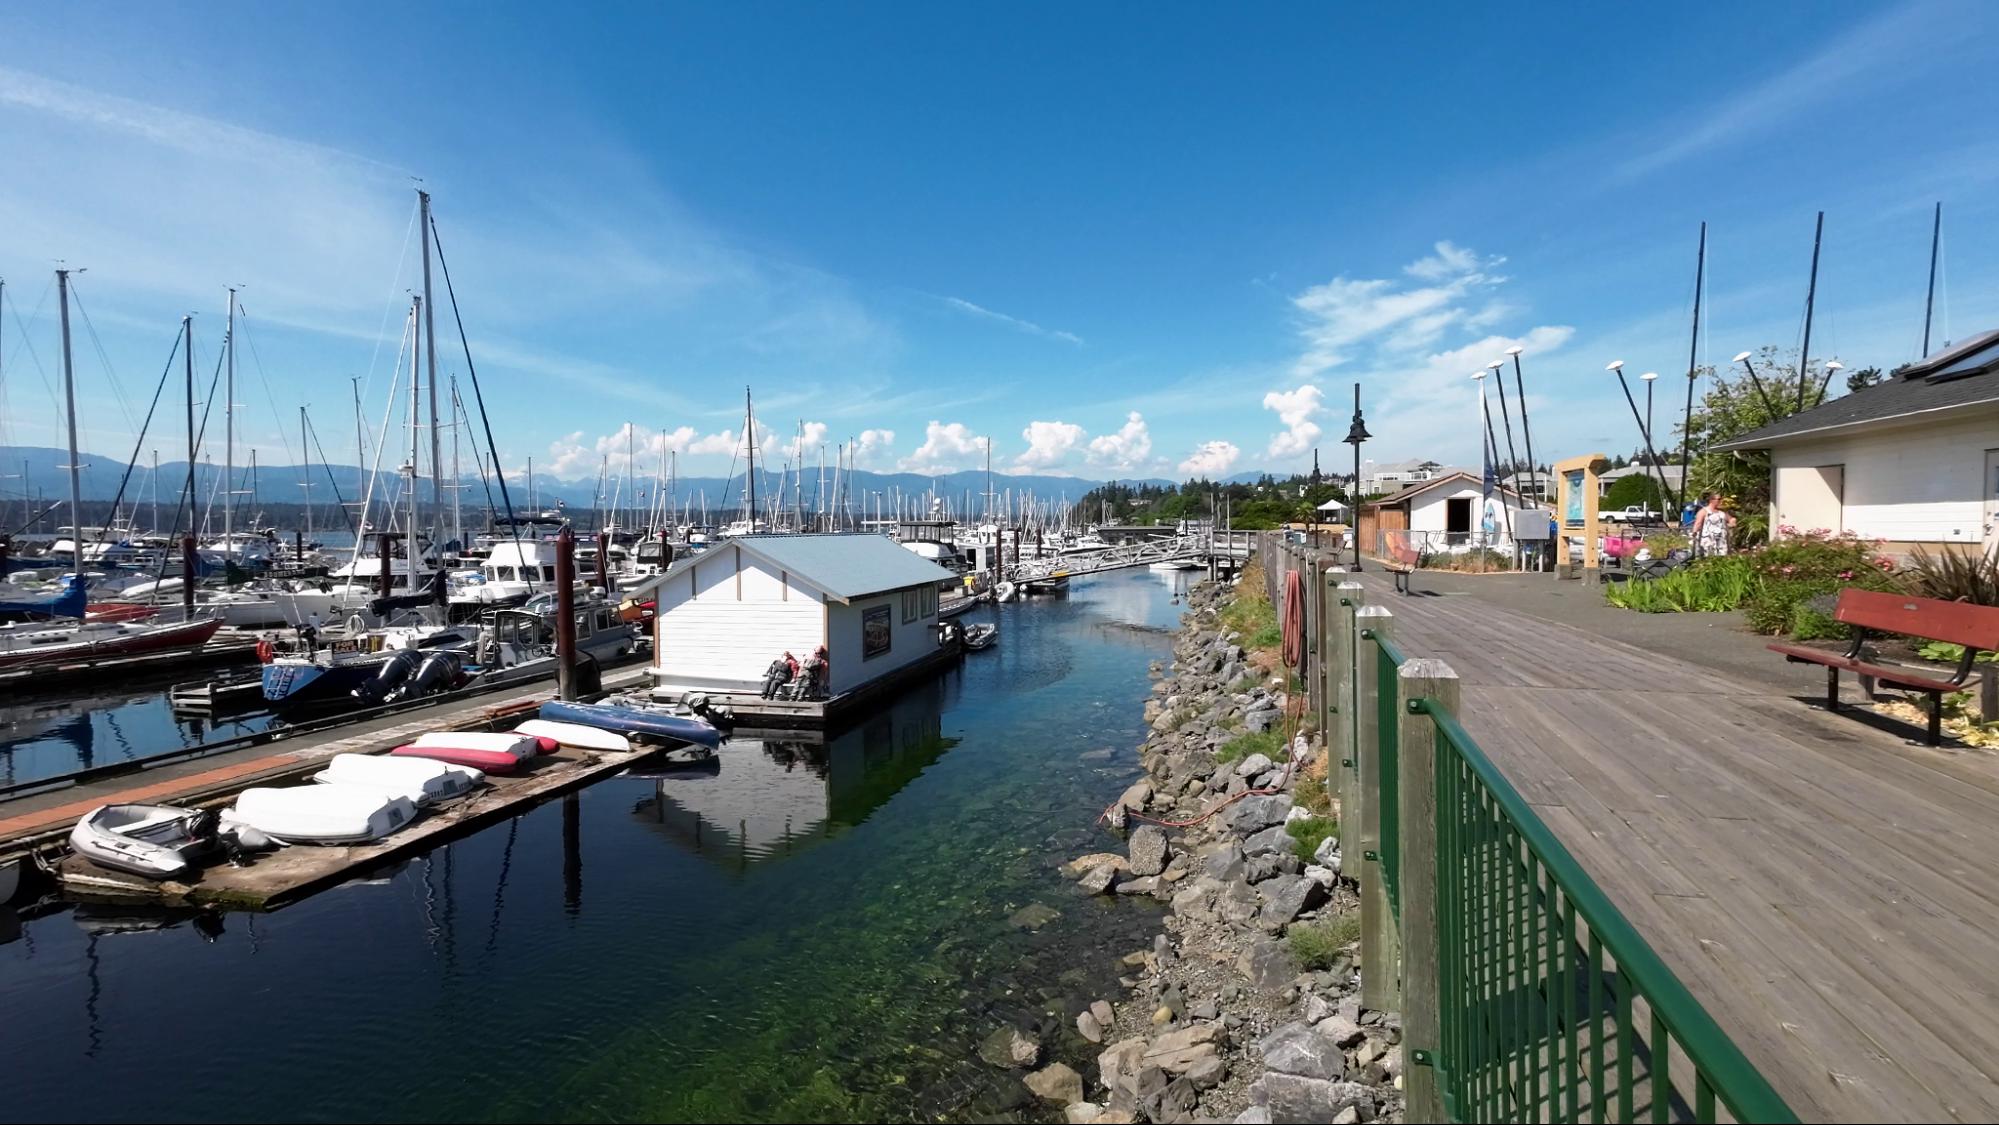 The waterfront and marina in Courtenay, BC.